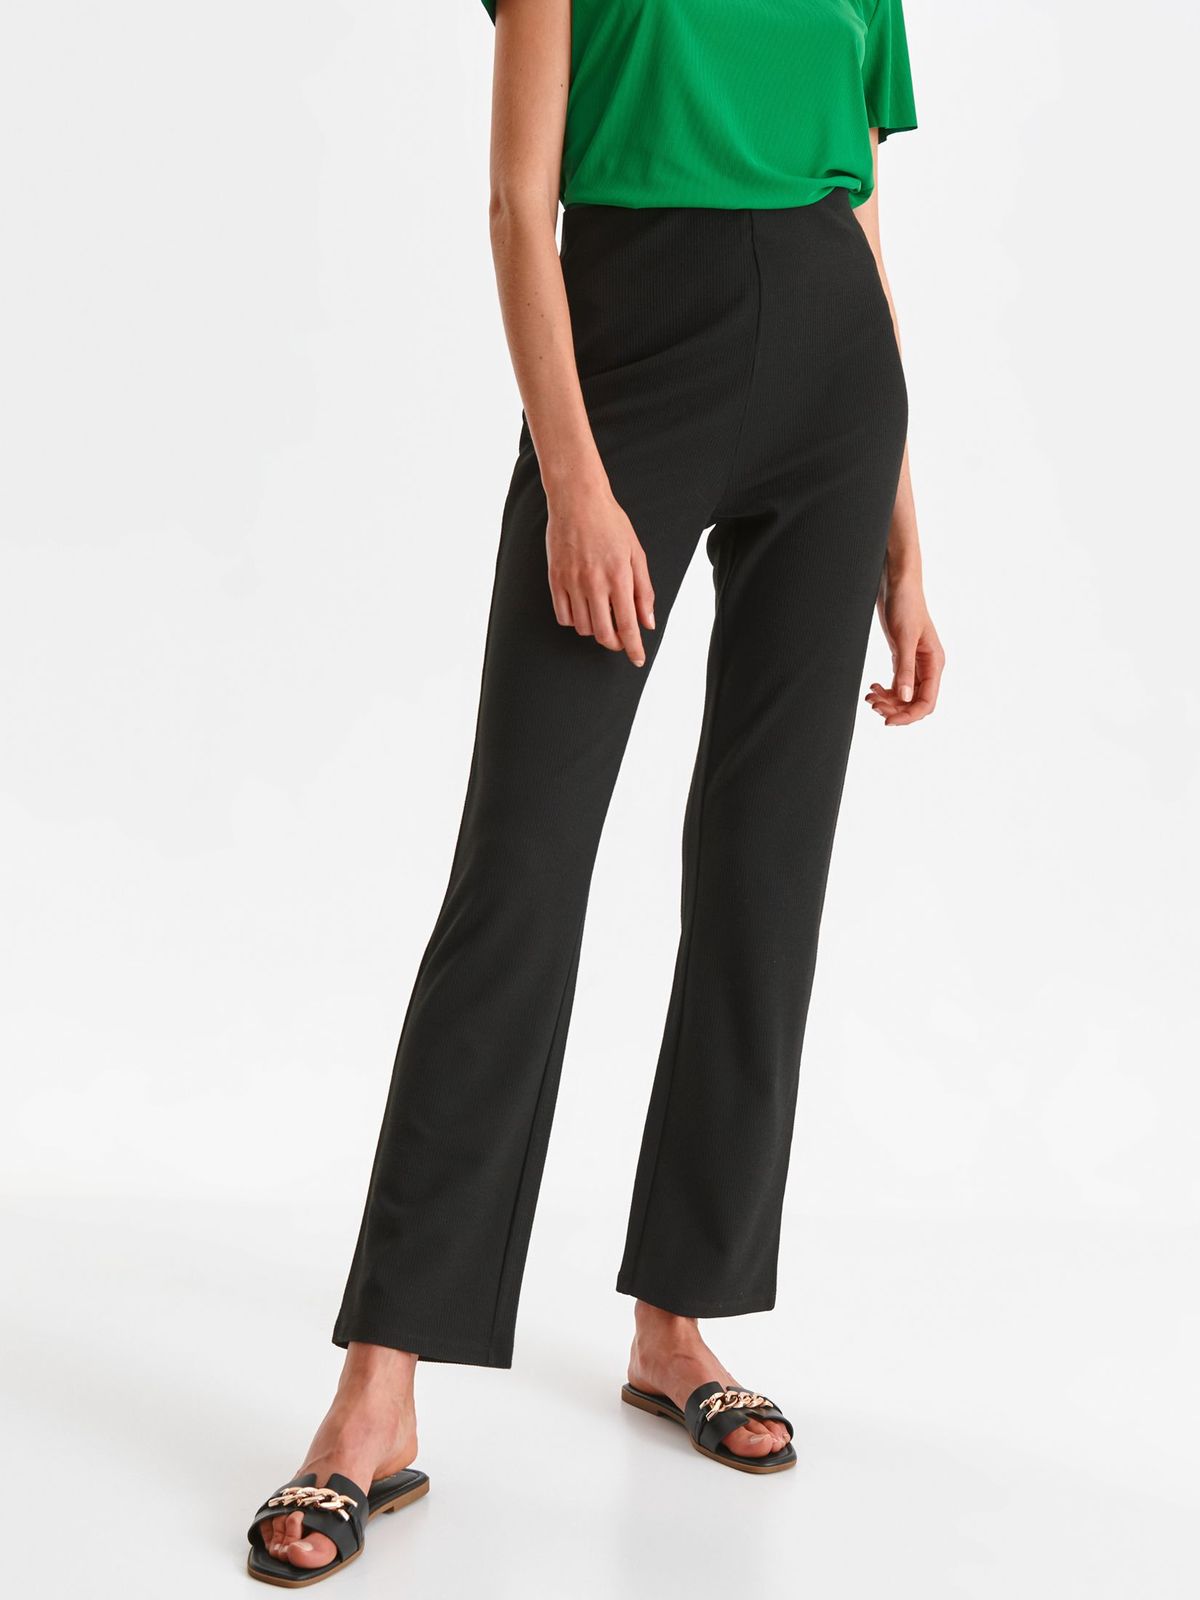 Black trousers from elastic fabric high waisted flaring cut